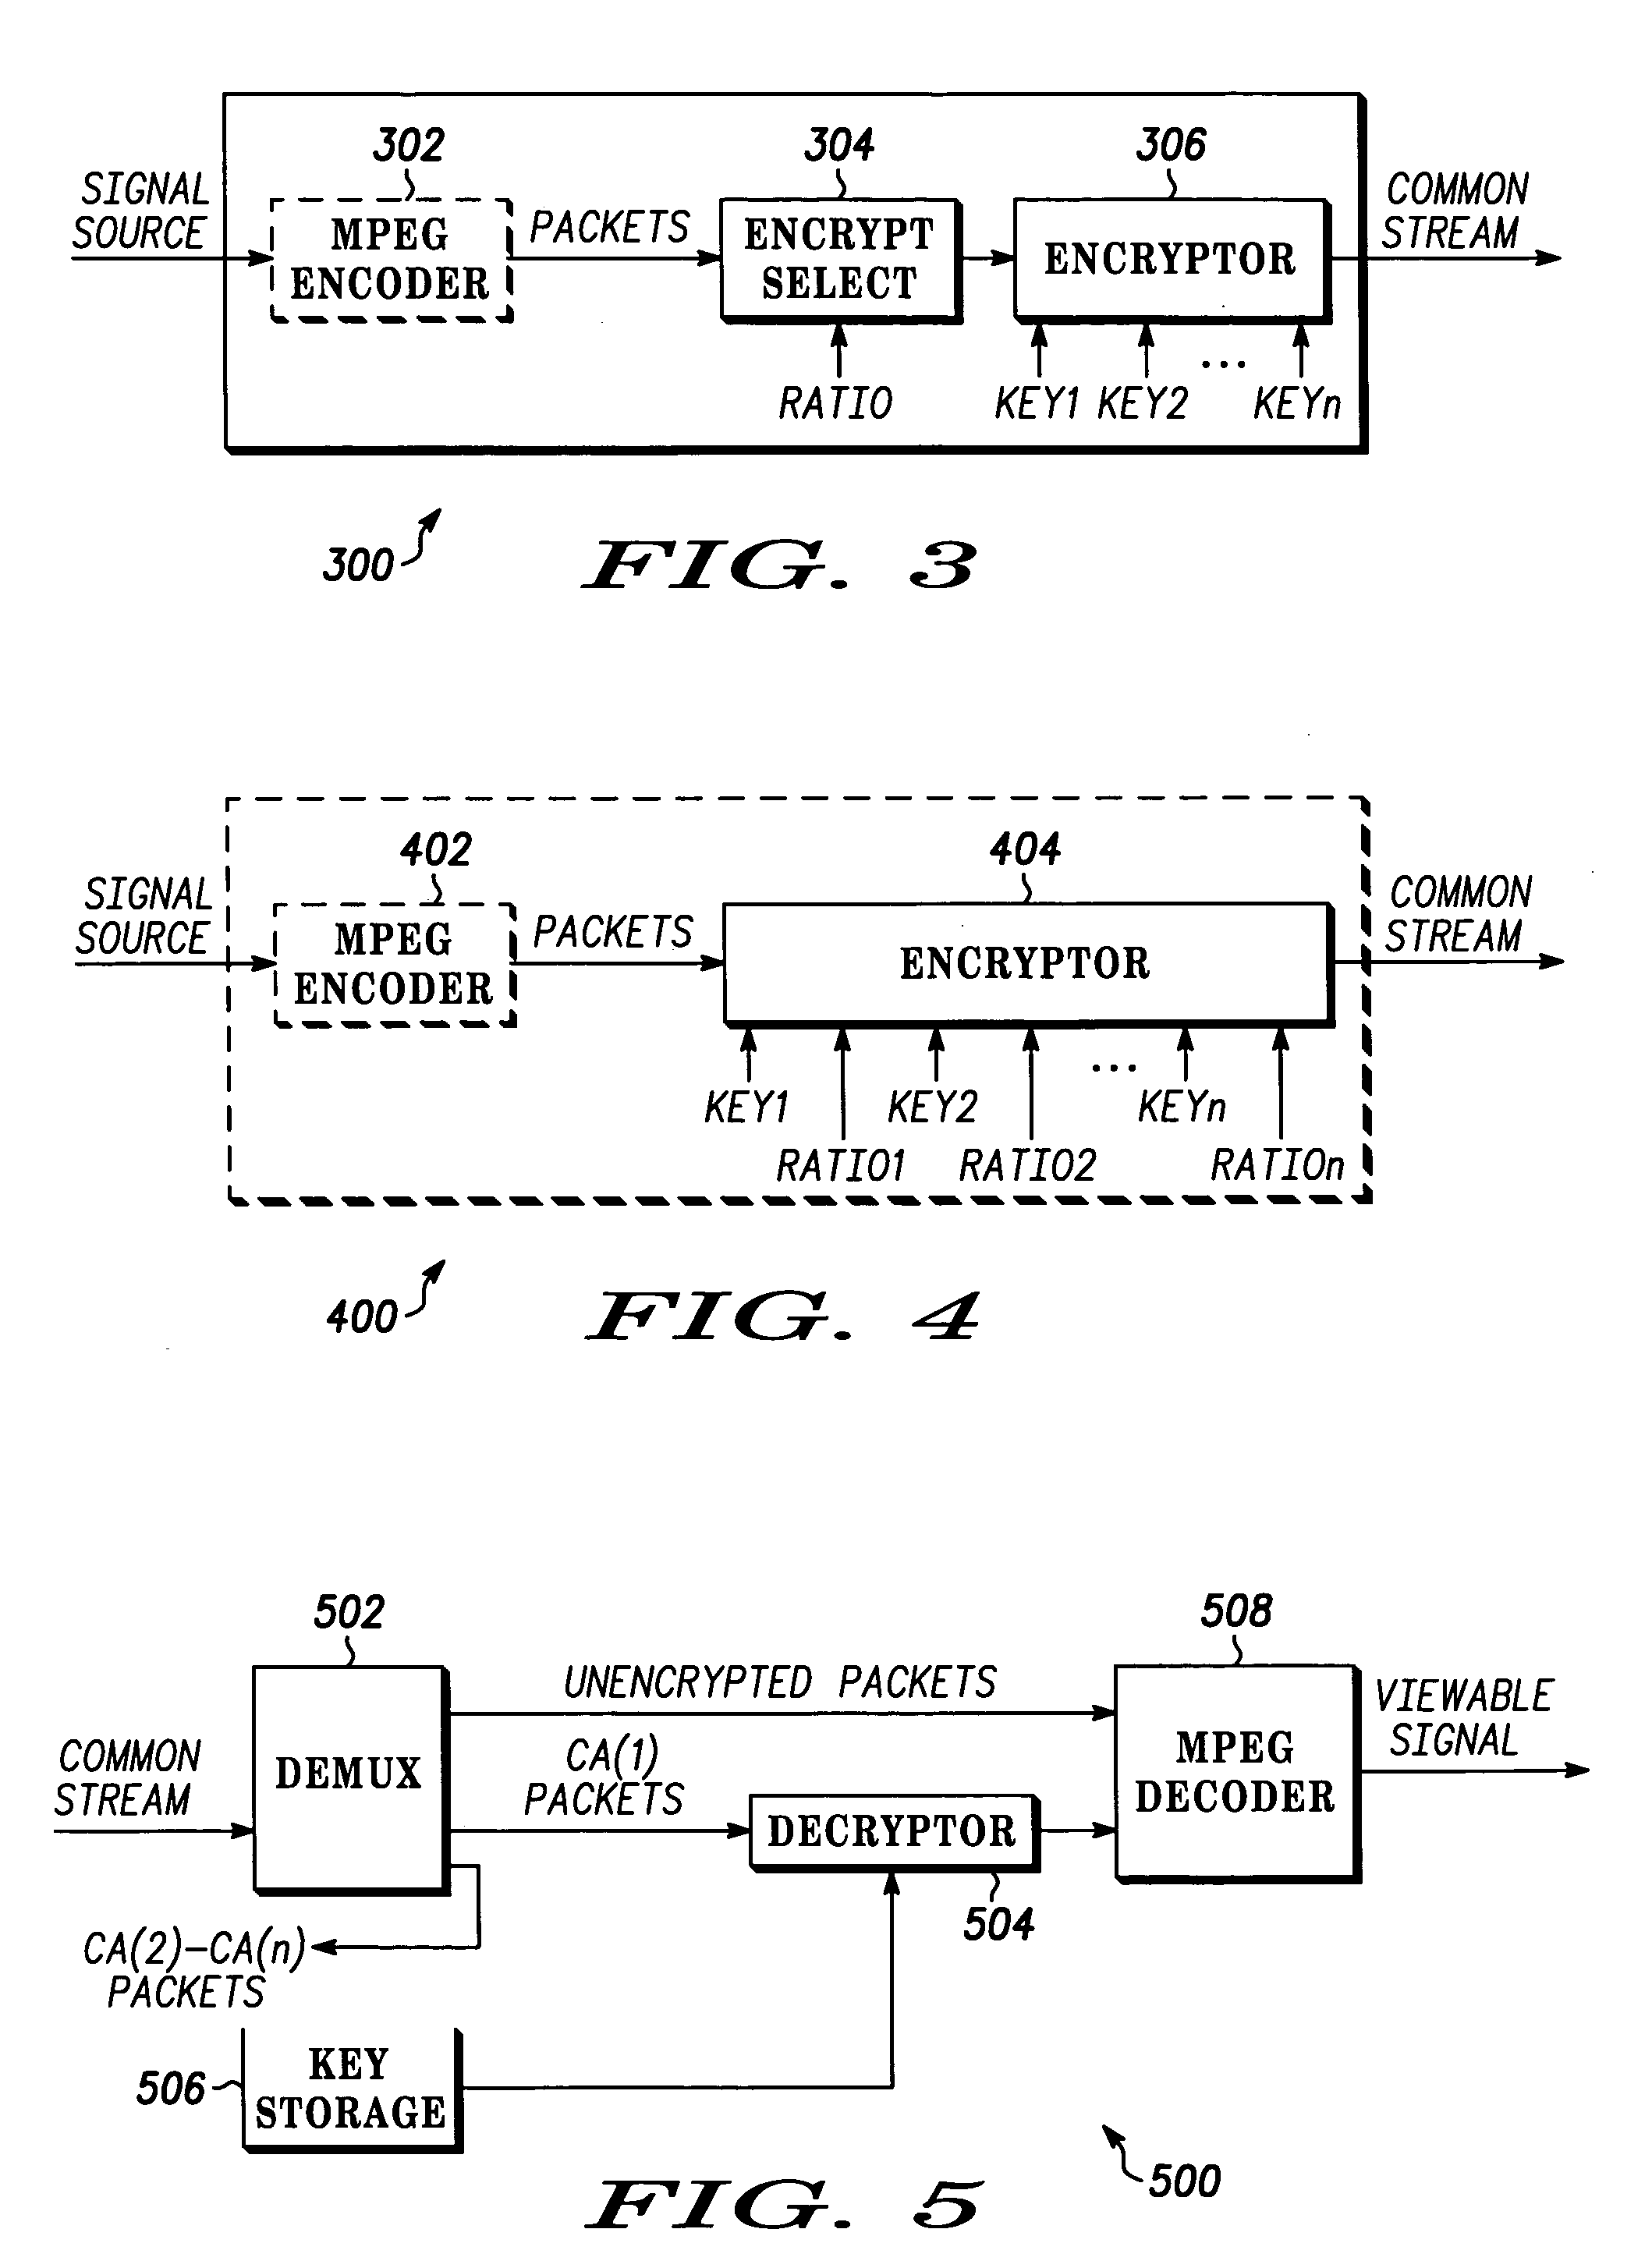 Efficient distribution of encrypted content for multiple content access systems